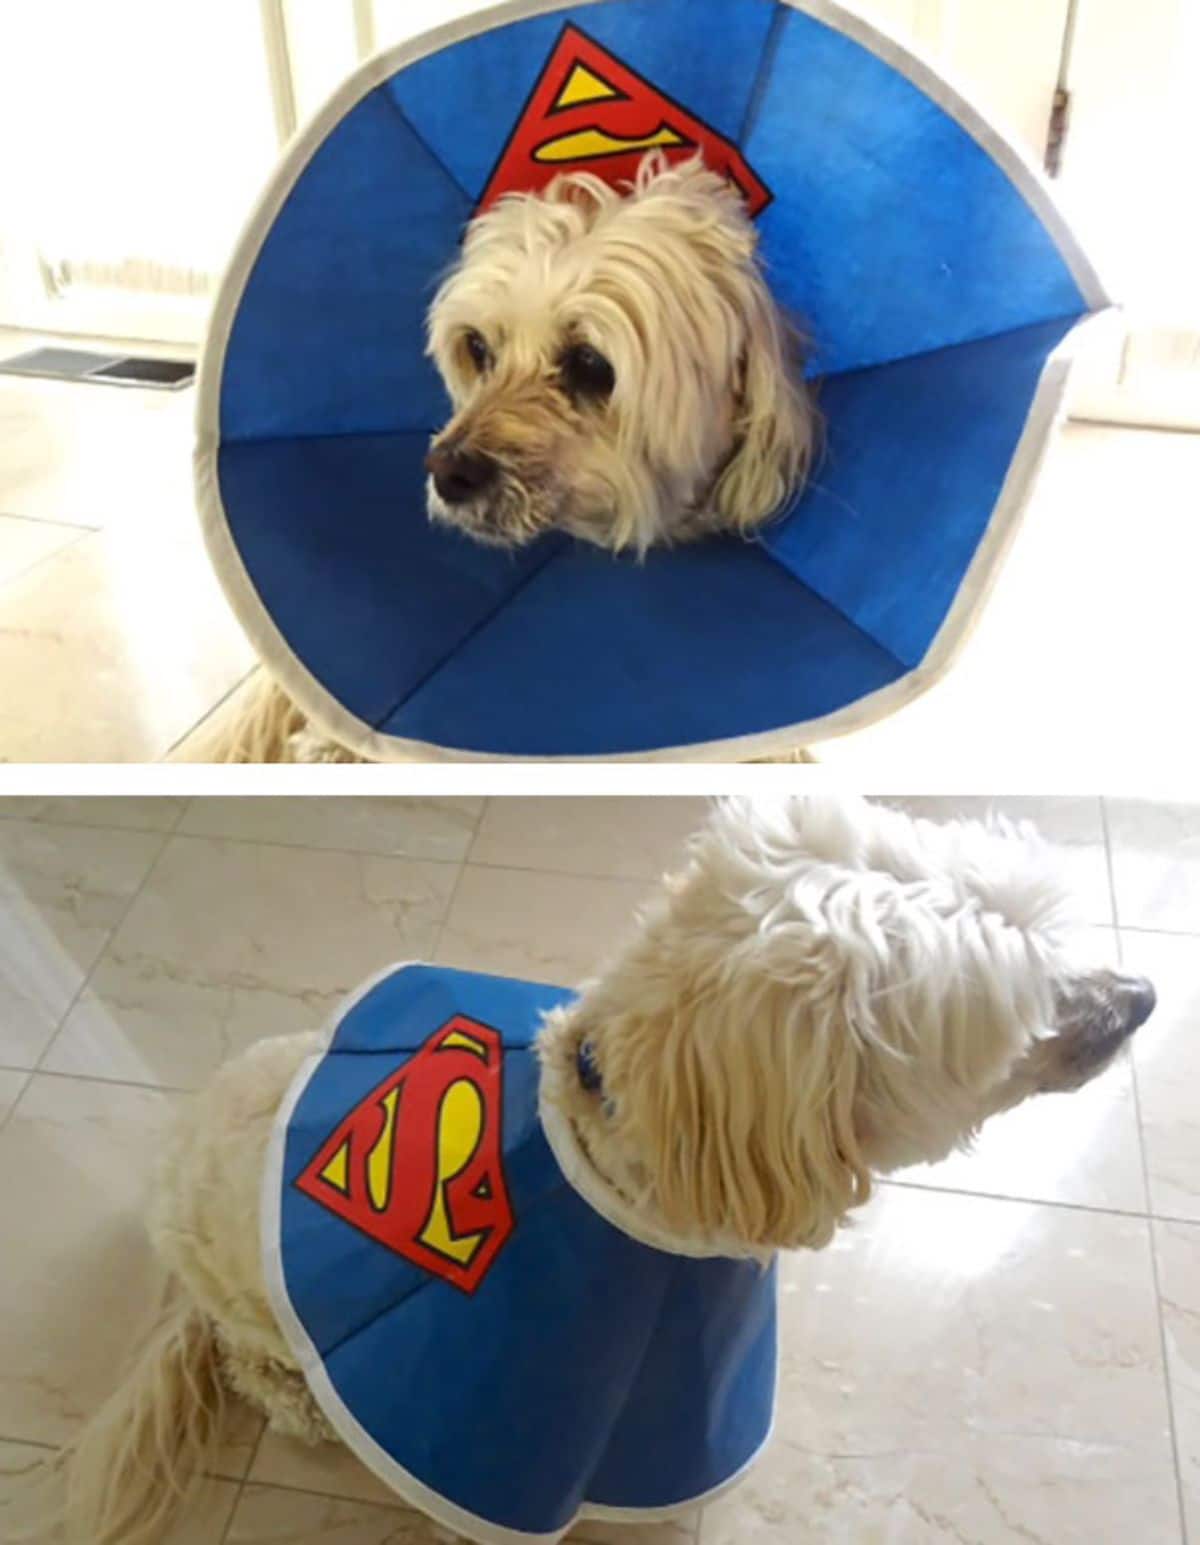 2 photos of a fluffy white dog with a blue superman cone of shame